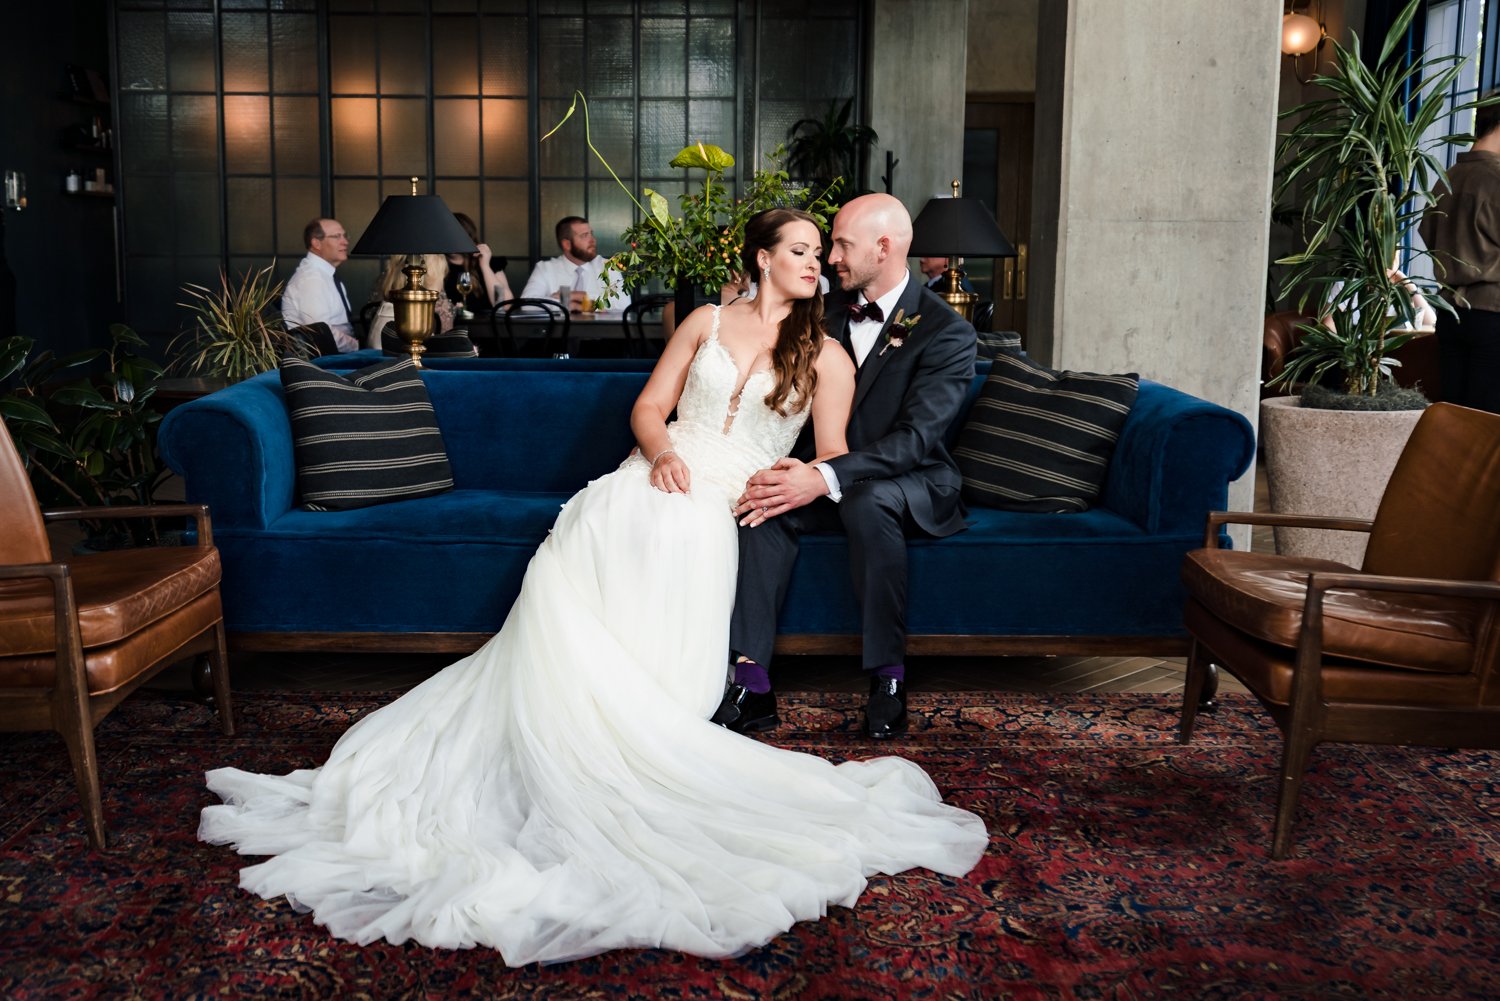  The Ramble Hotel wedding by Denver photographer, JMGant Photography featuring Ahsley and Jeremy 